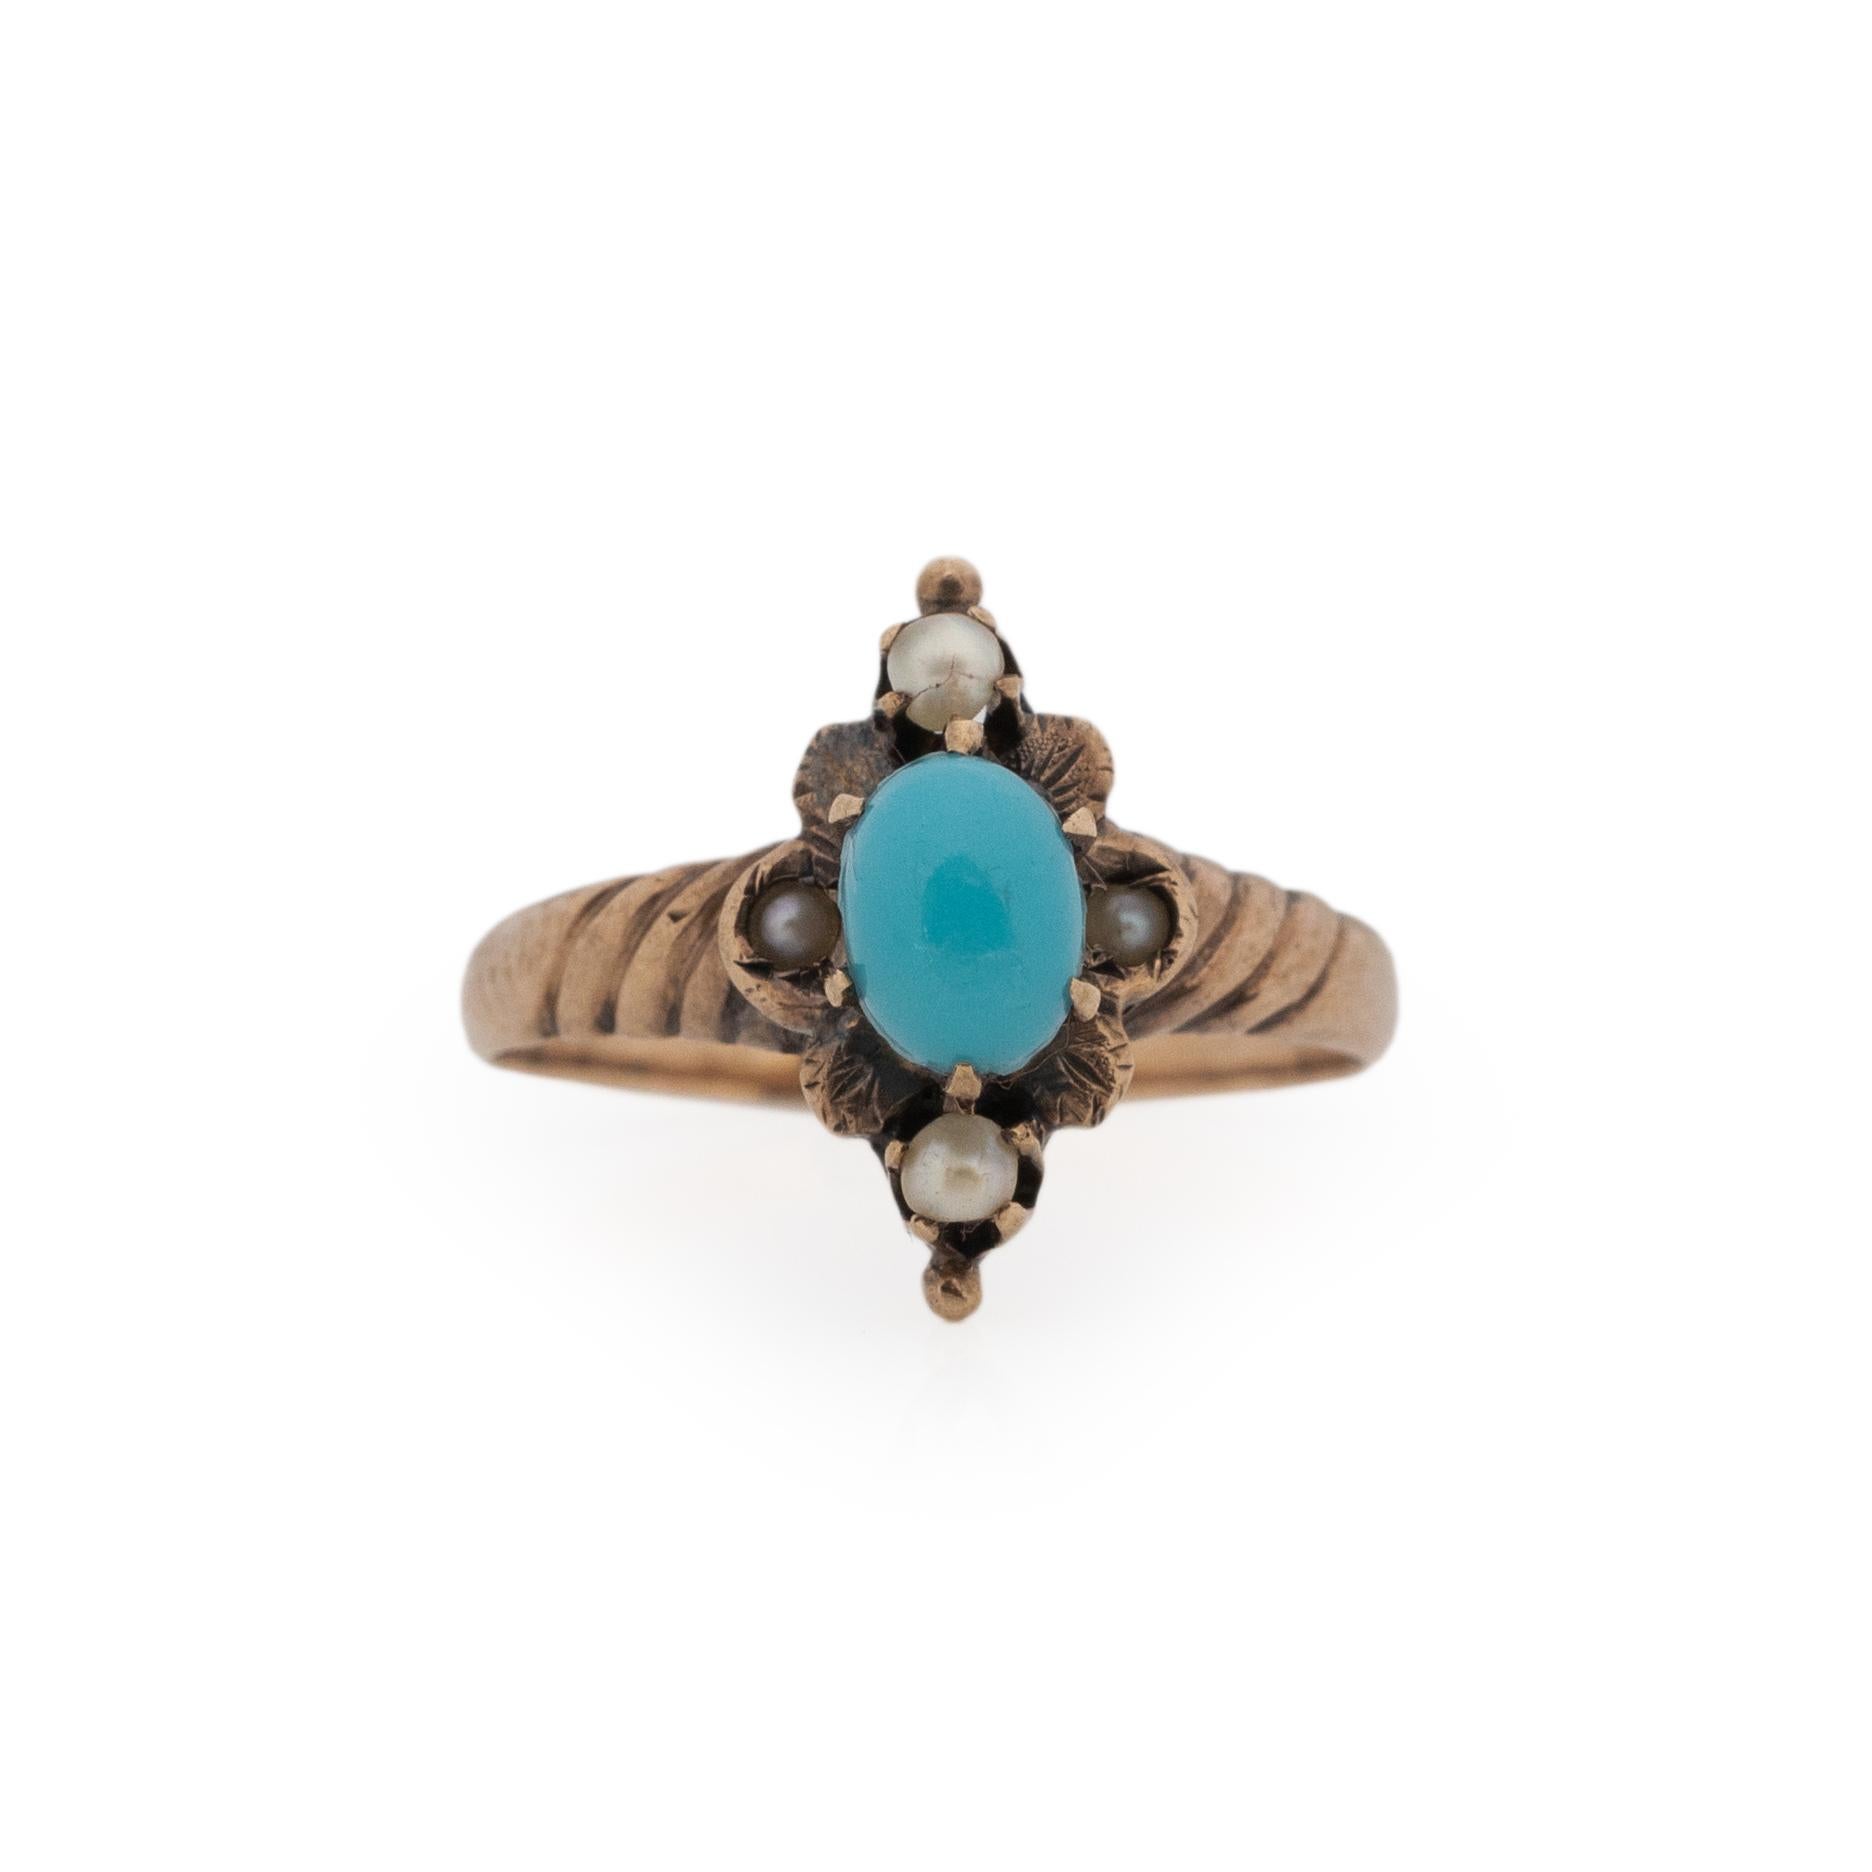 This Victorian stunner is a wonderful conversation piece. Hand crafted in 10K rose gold, this ring sits elongated on the finger. In a North South design, in the center of the floralesk shape is a smooth turquoise cabochon delicately held in by six